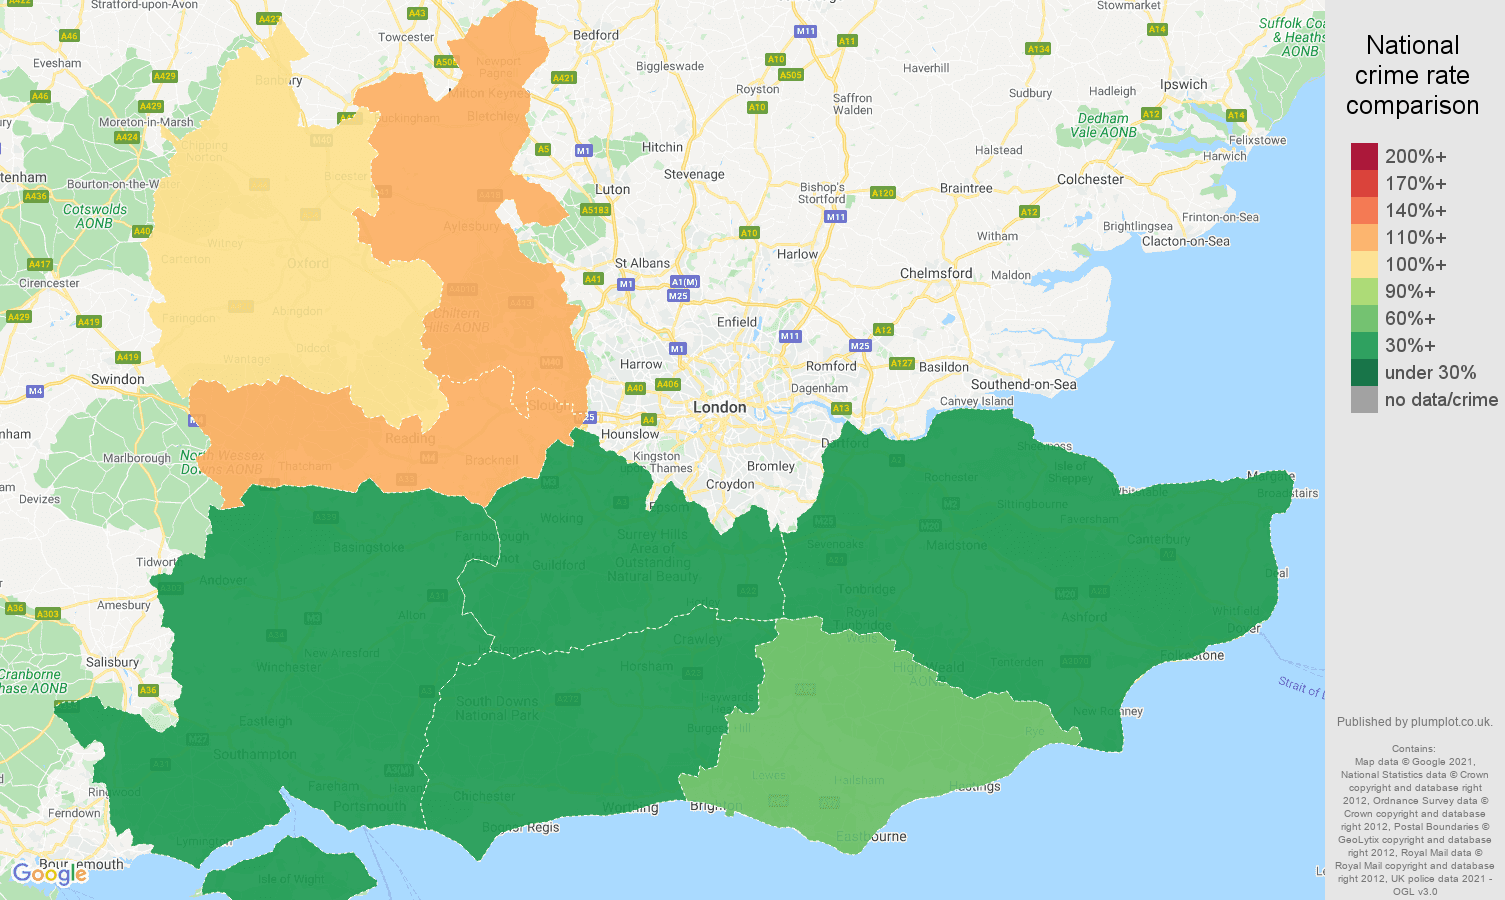 South East theft from the person crime rate comparison map